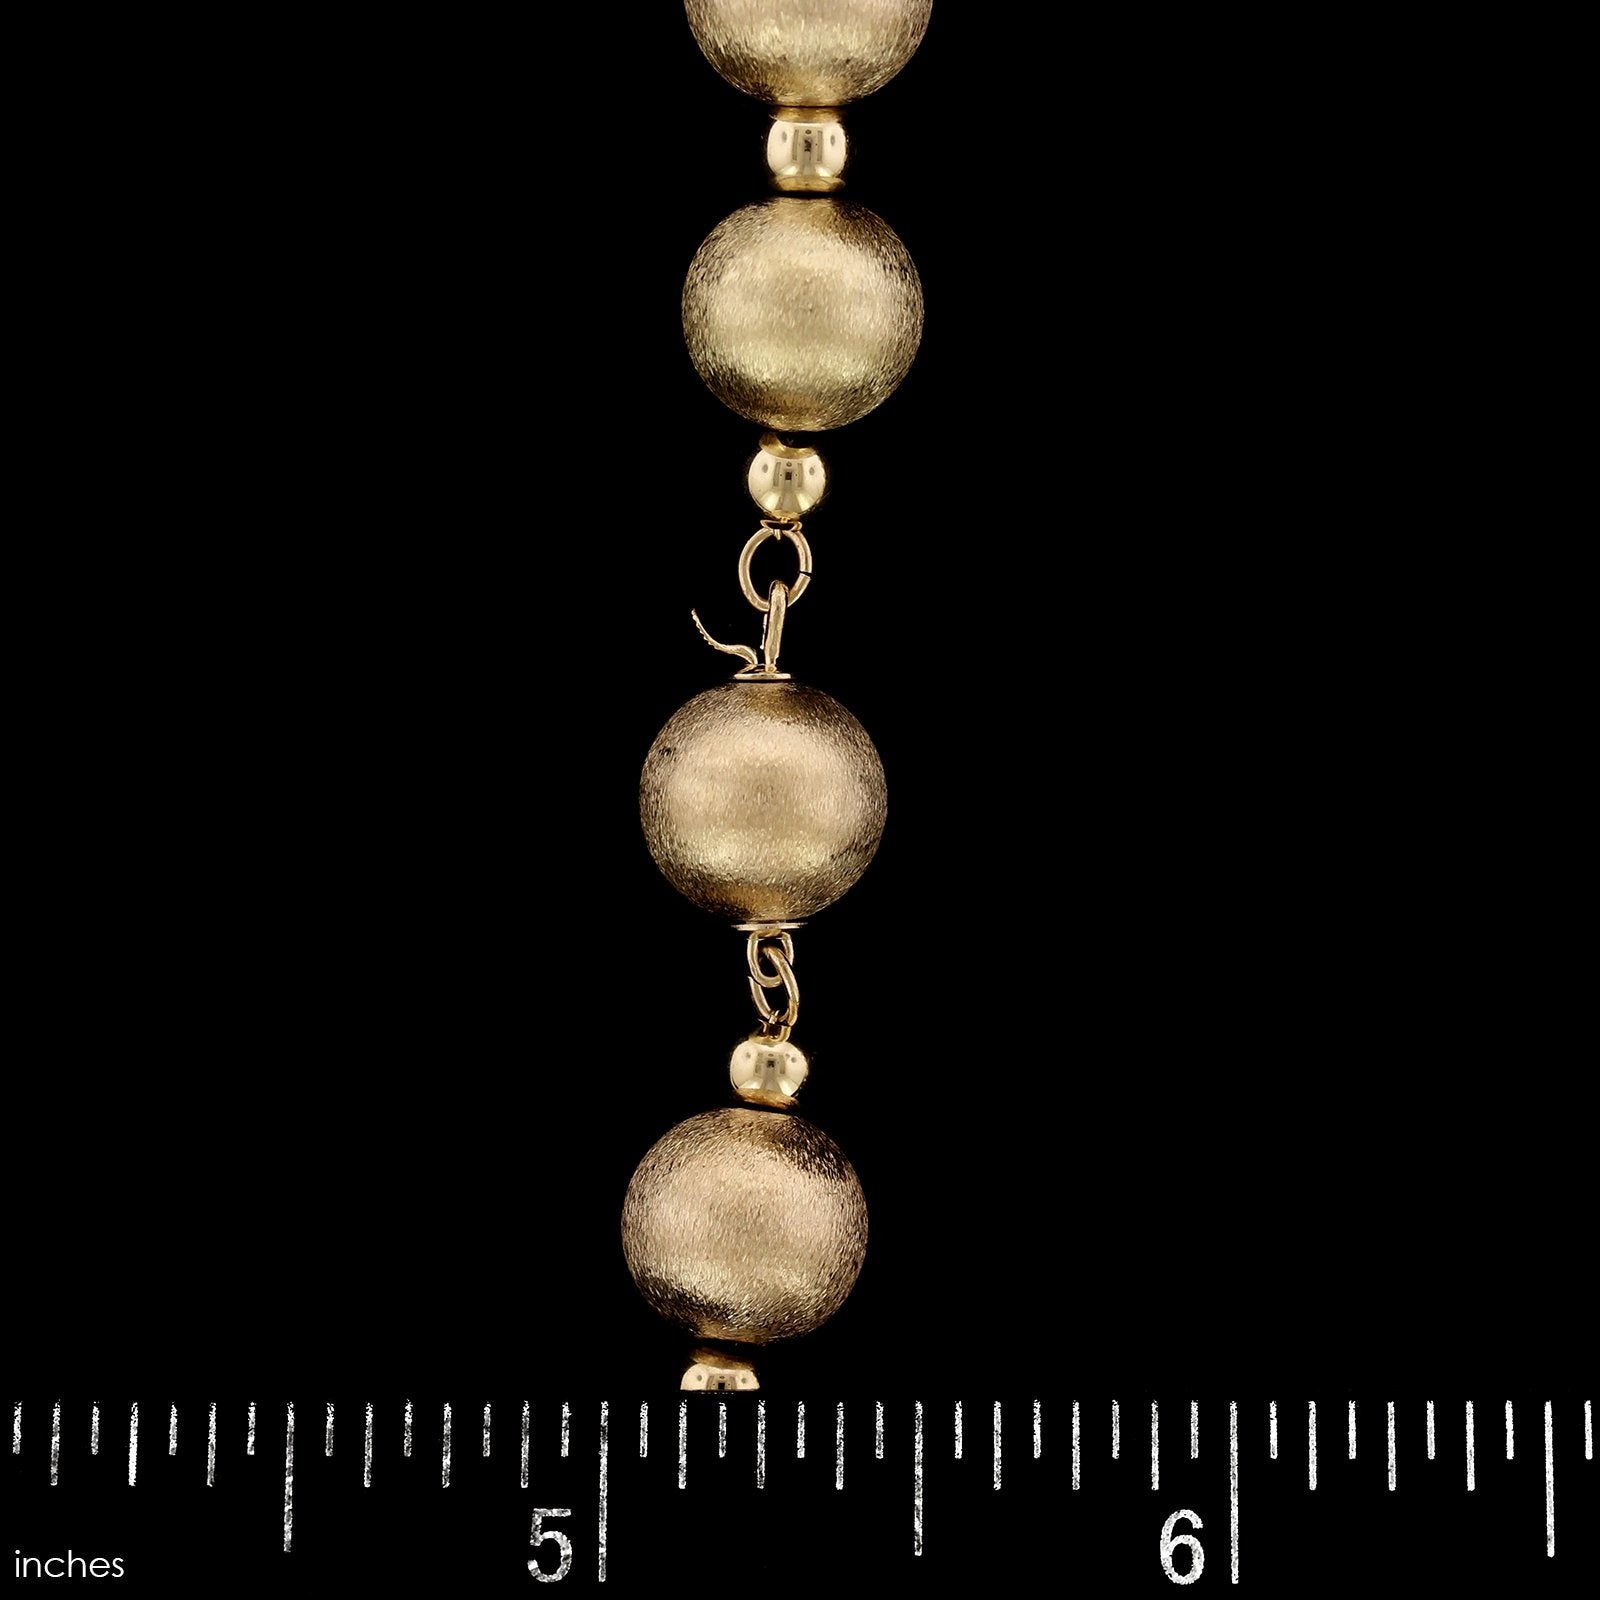 14K Yellow Gold Estate Bead Necklace